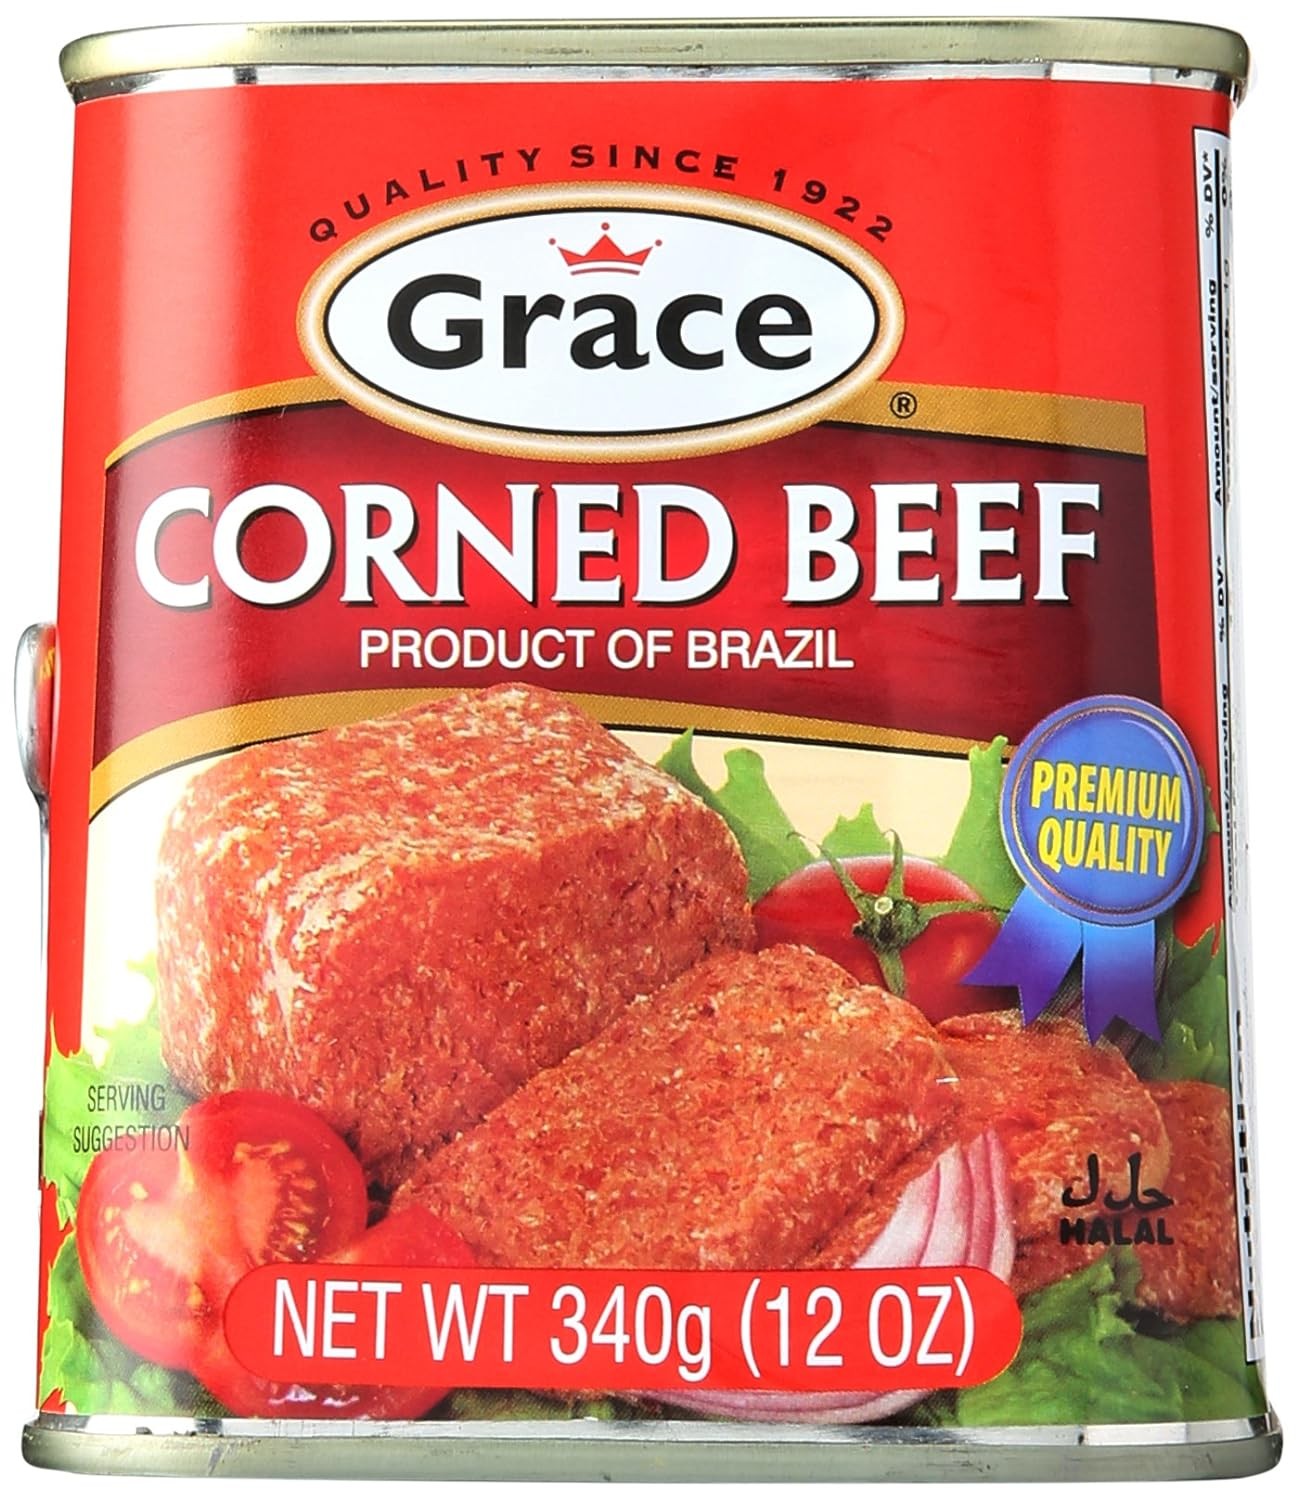 Grace Corned Beef 12 oz. can